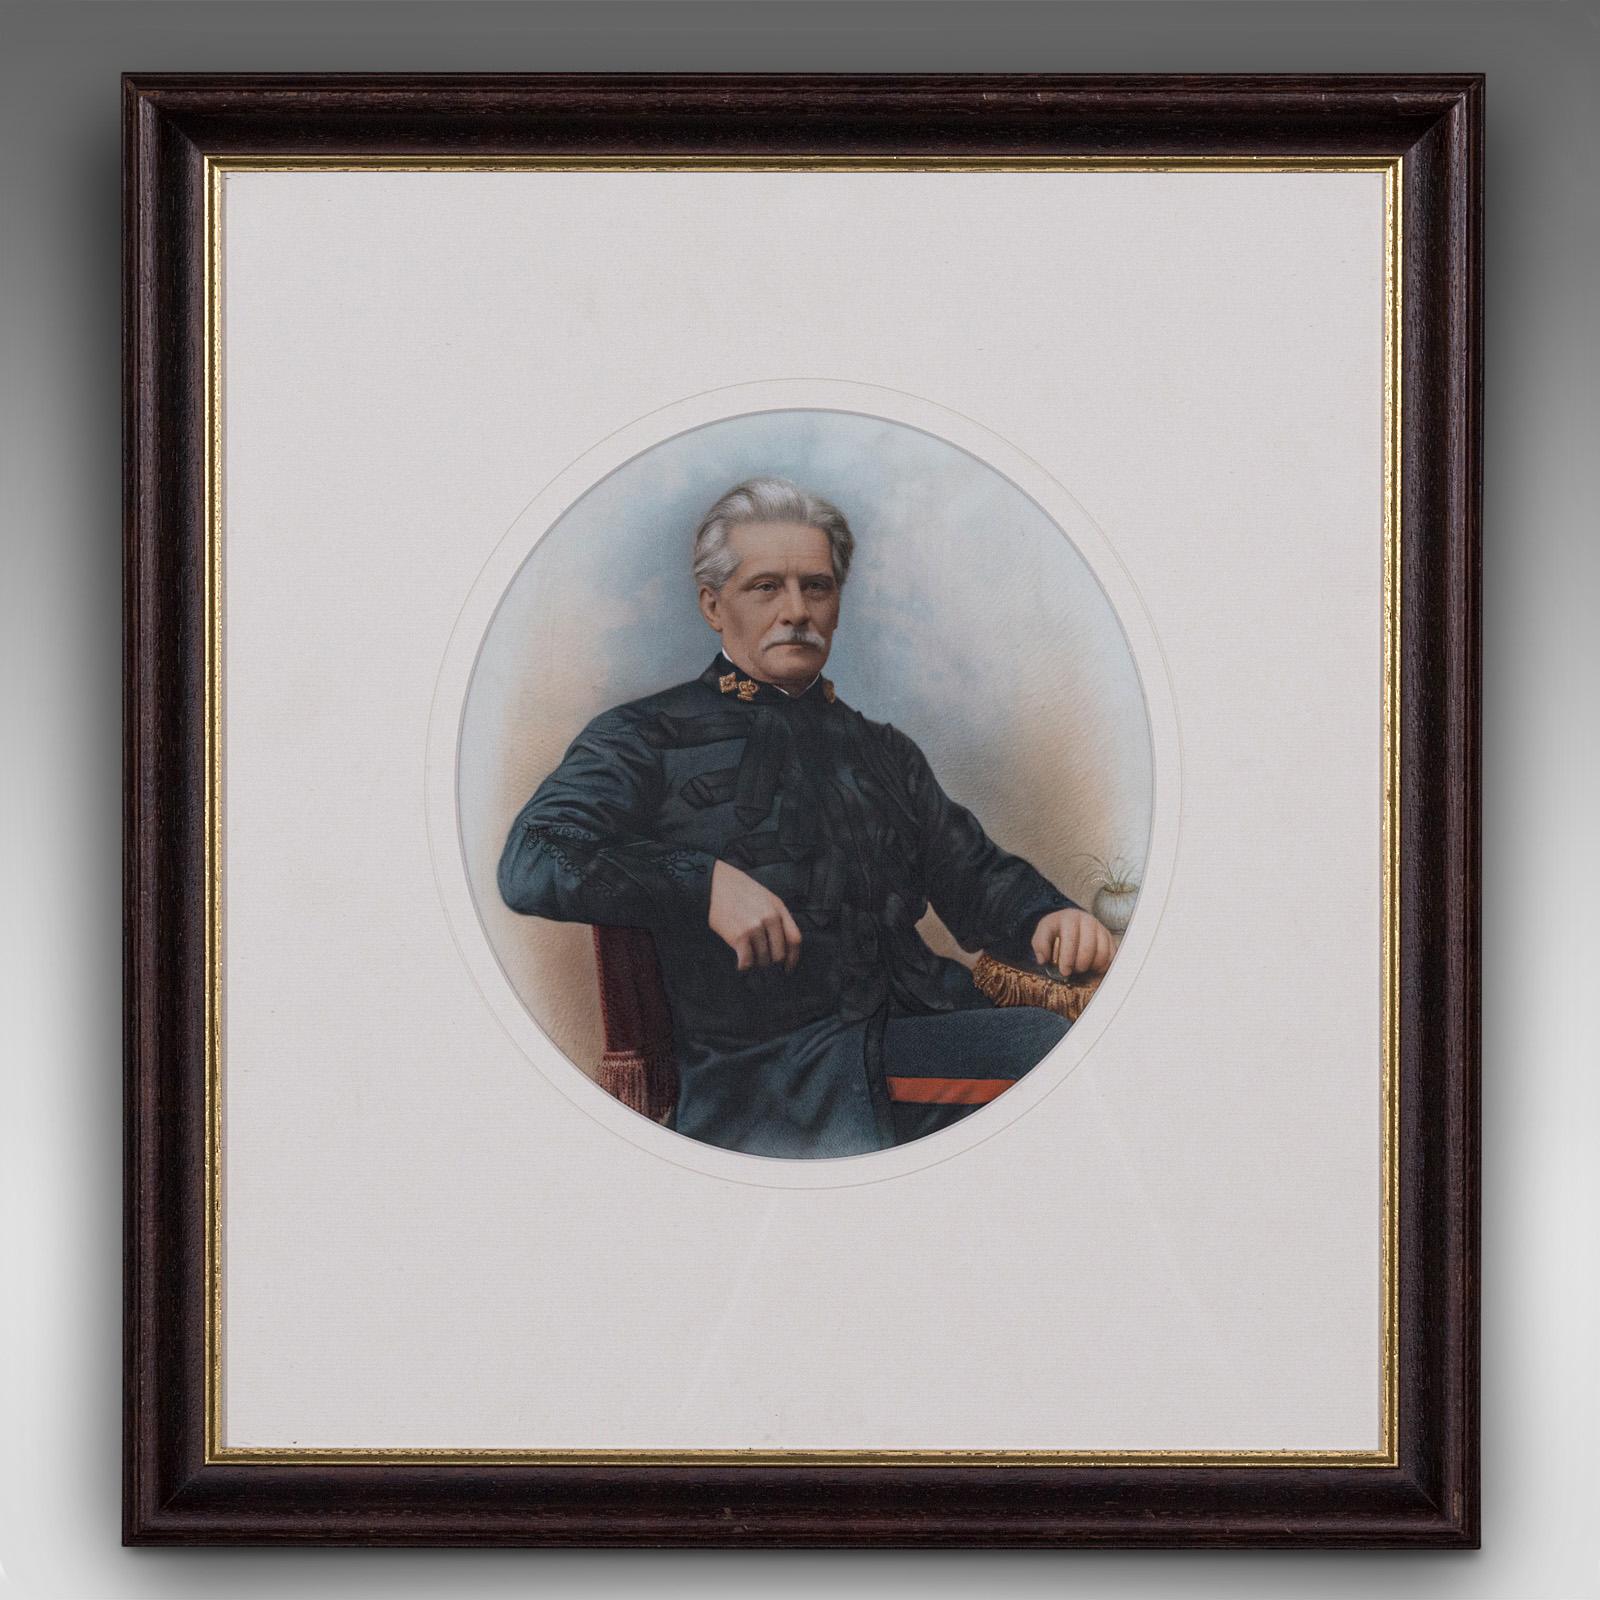 This is an antique portrait. An English, framed ceramic painting, dating to the late Victorian period, circa 1890 and later.

Deputy Surgeon General John Robert Theobalds (dates unknown - granted retirement by Queen Victoria in April 1880) was